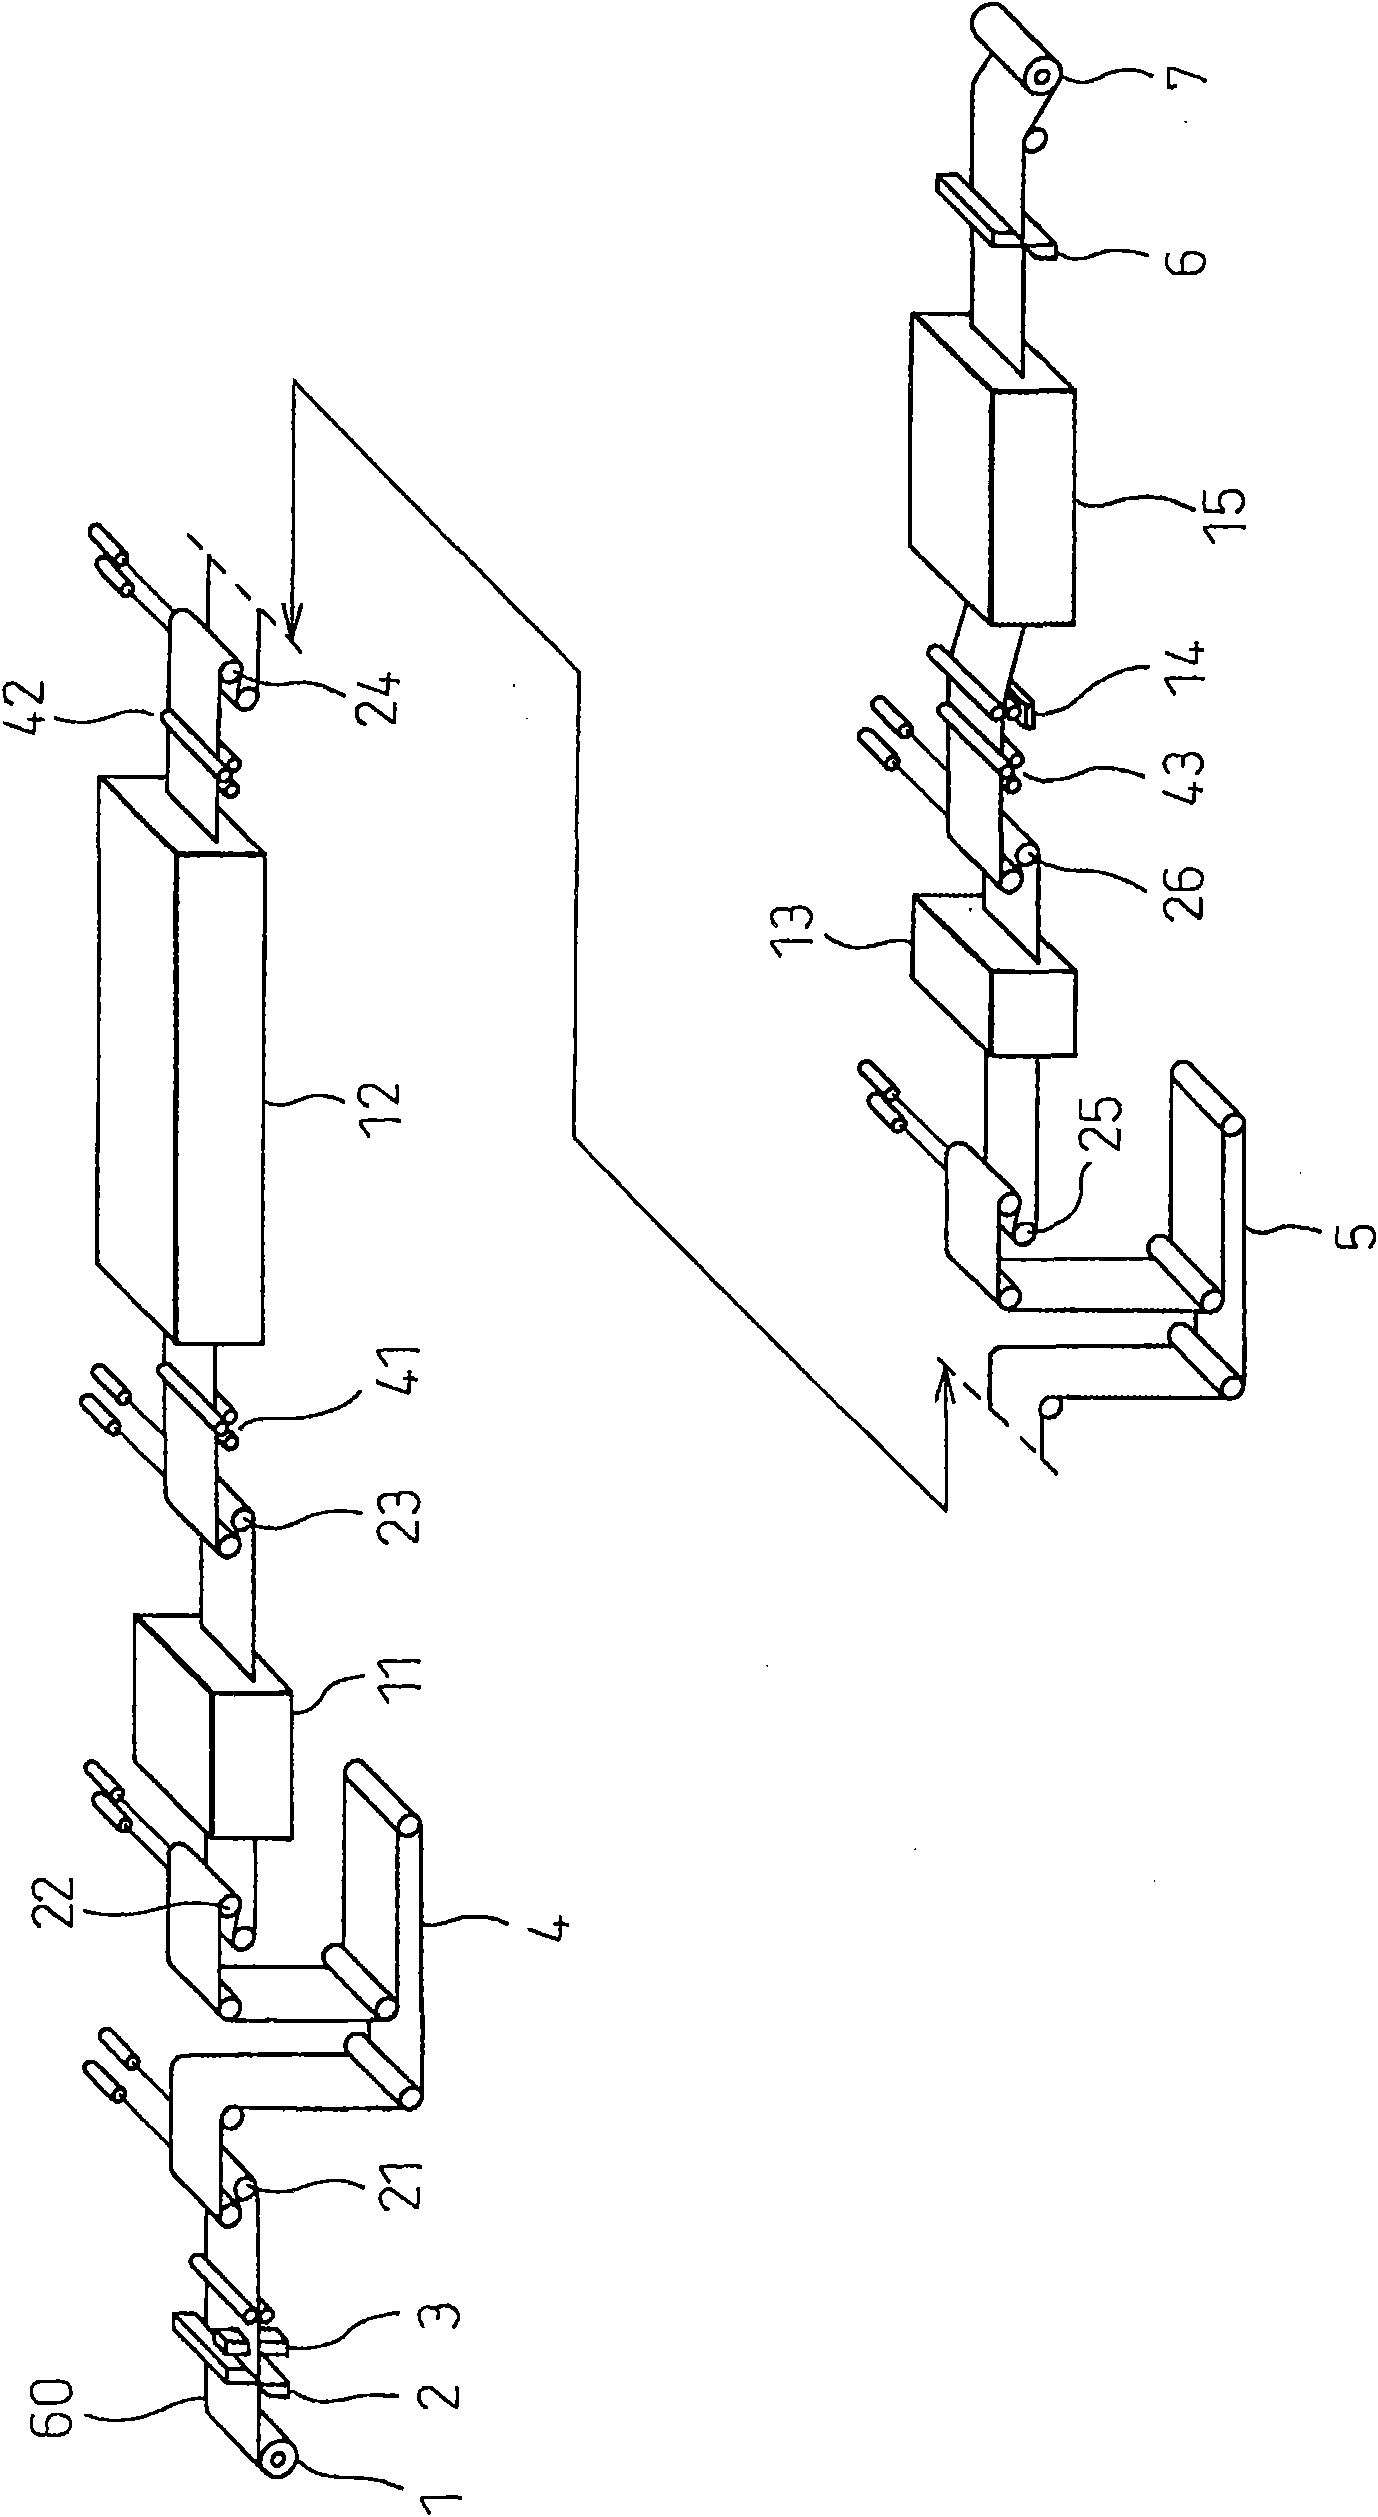 Method of continuous annealing for steel strip with curie point and continuous annealing apparatus therefor